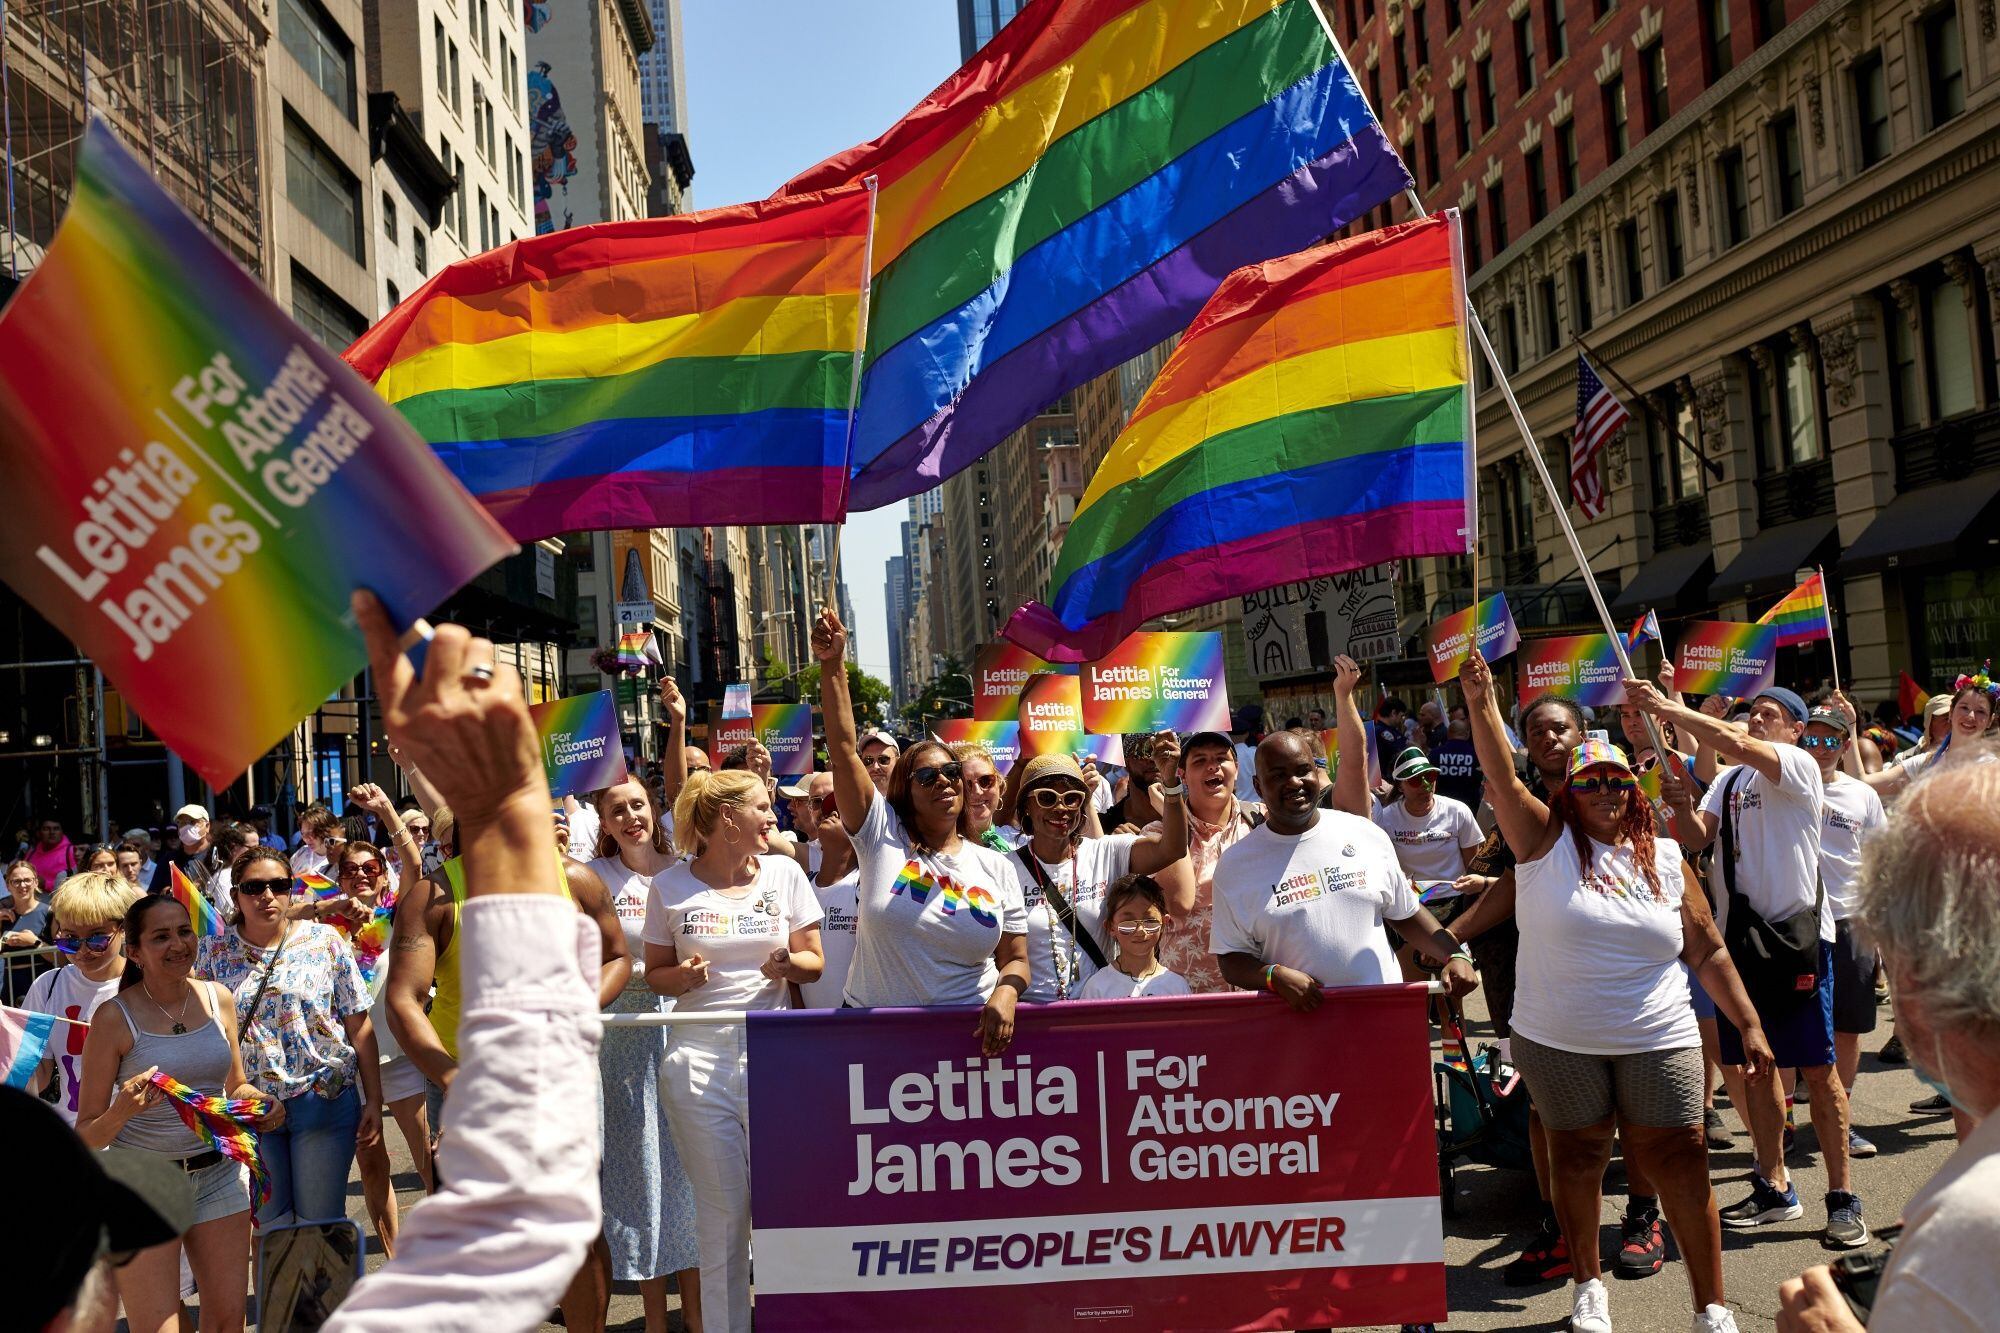 New York Attorney General Letitia James, center, attends the New York Pride Parade in New York, USA.